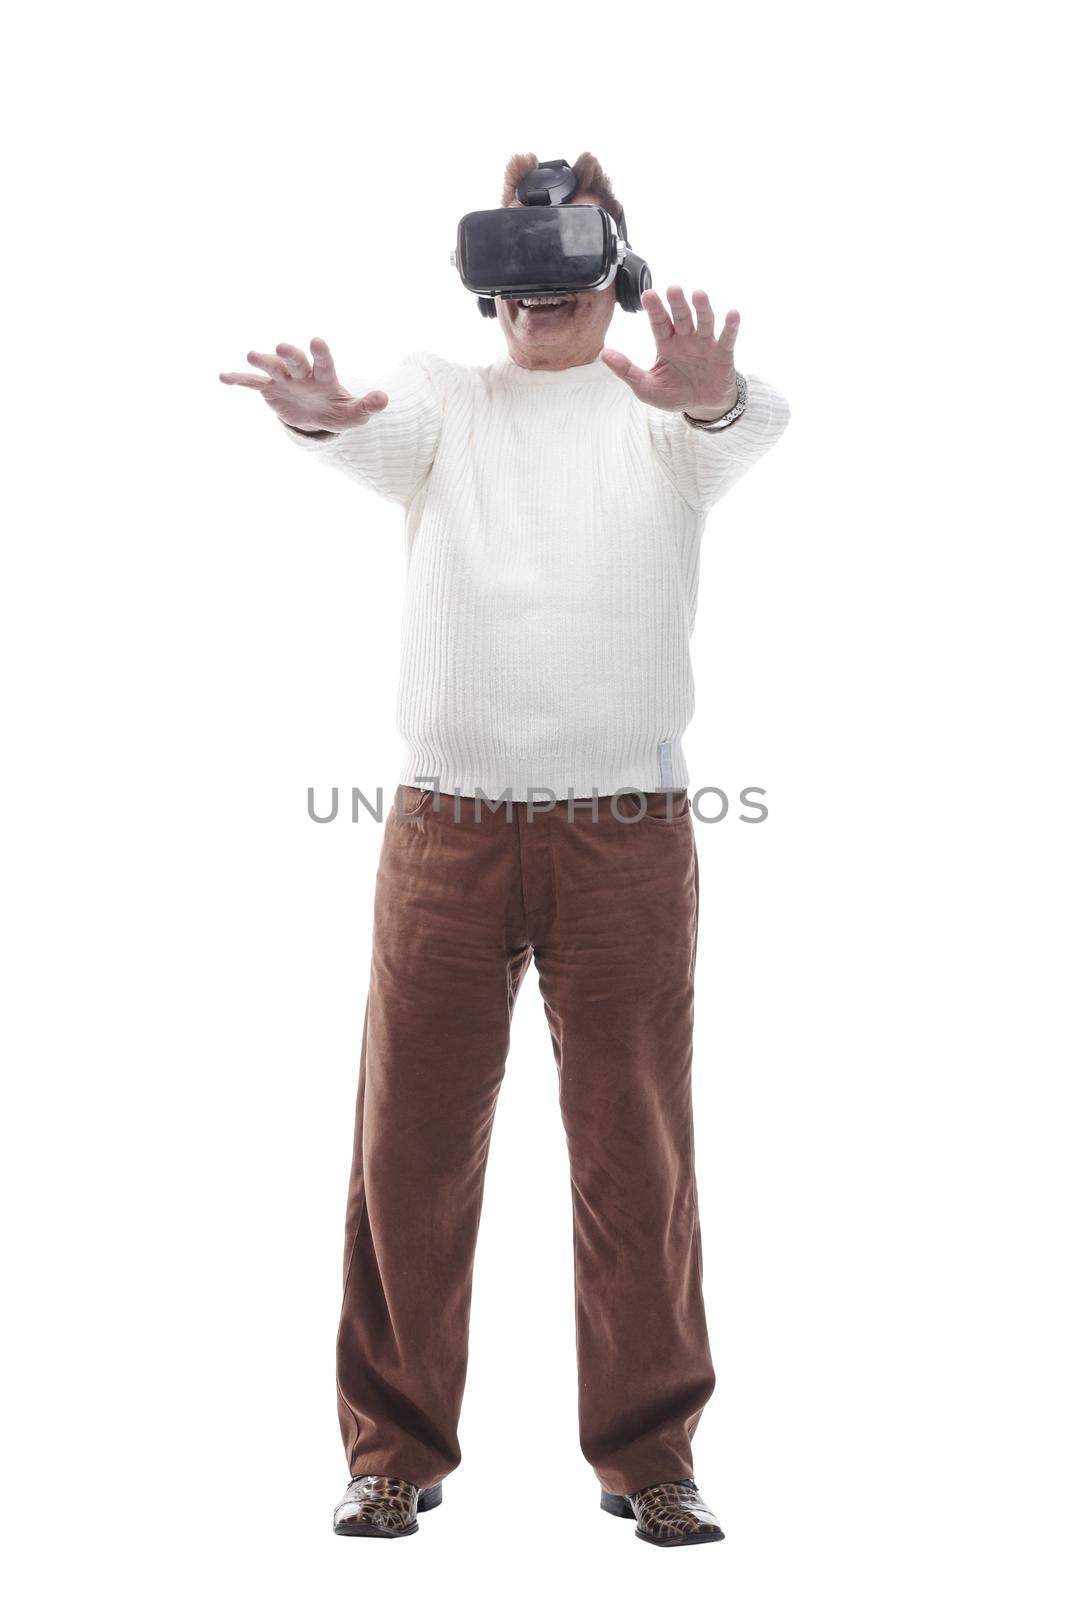 adult male looking with interest through virtual reality glasses by asdf